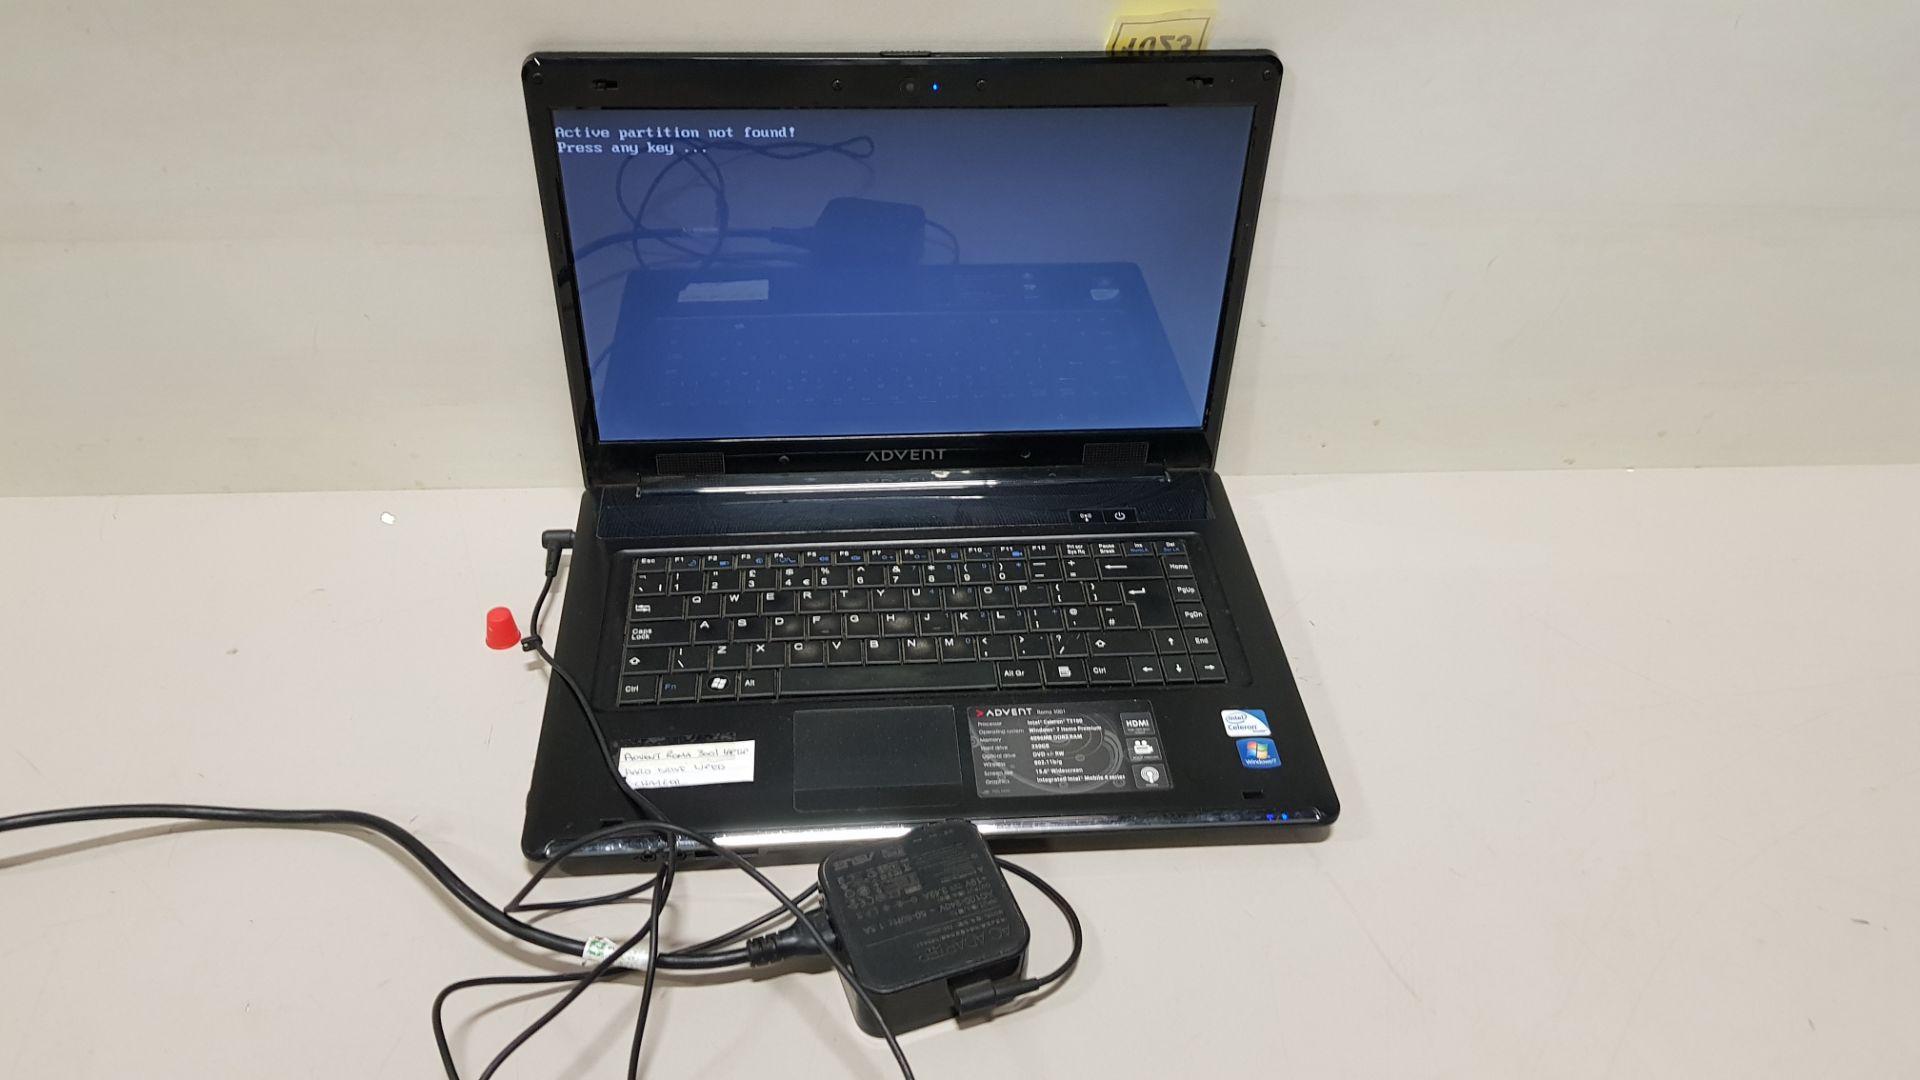 1 X ADVENT ROMA 300 L LAPTOP - HARD DRIVE WIPED - NO OS - COMES WITH CHARGER